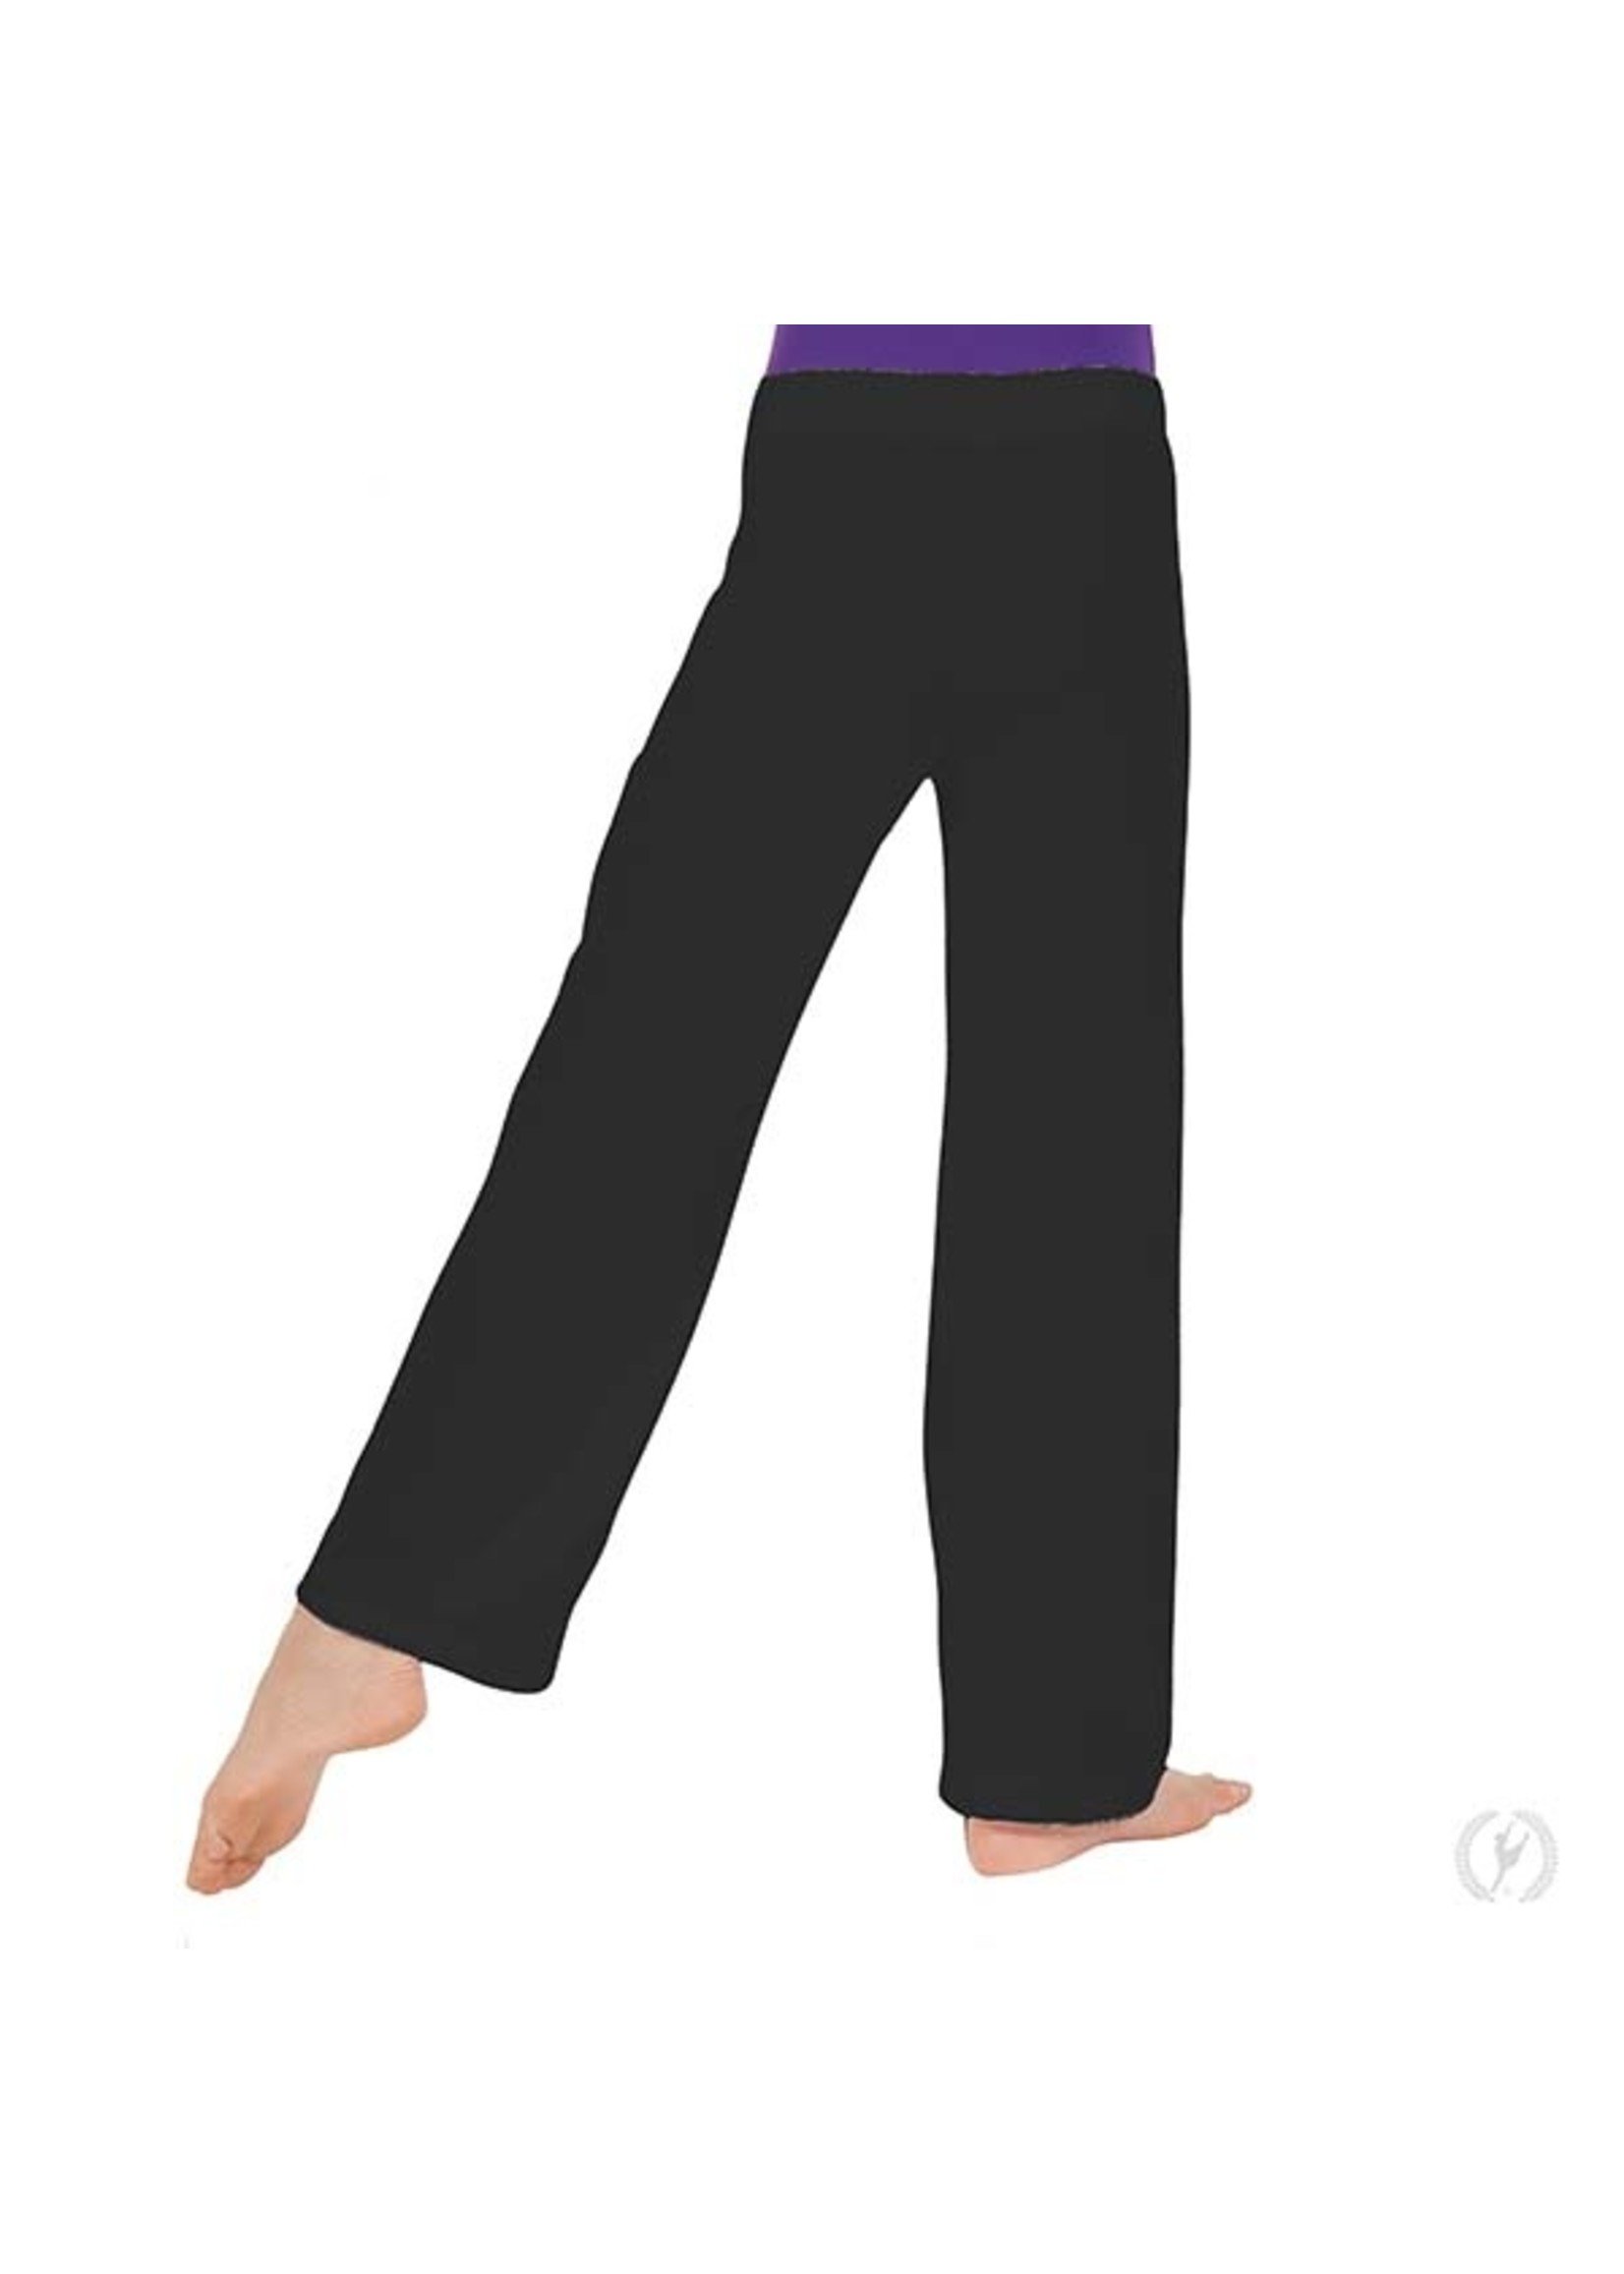 ET Relaxed Fit Pants with Drawstring Waist (Unisex)